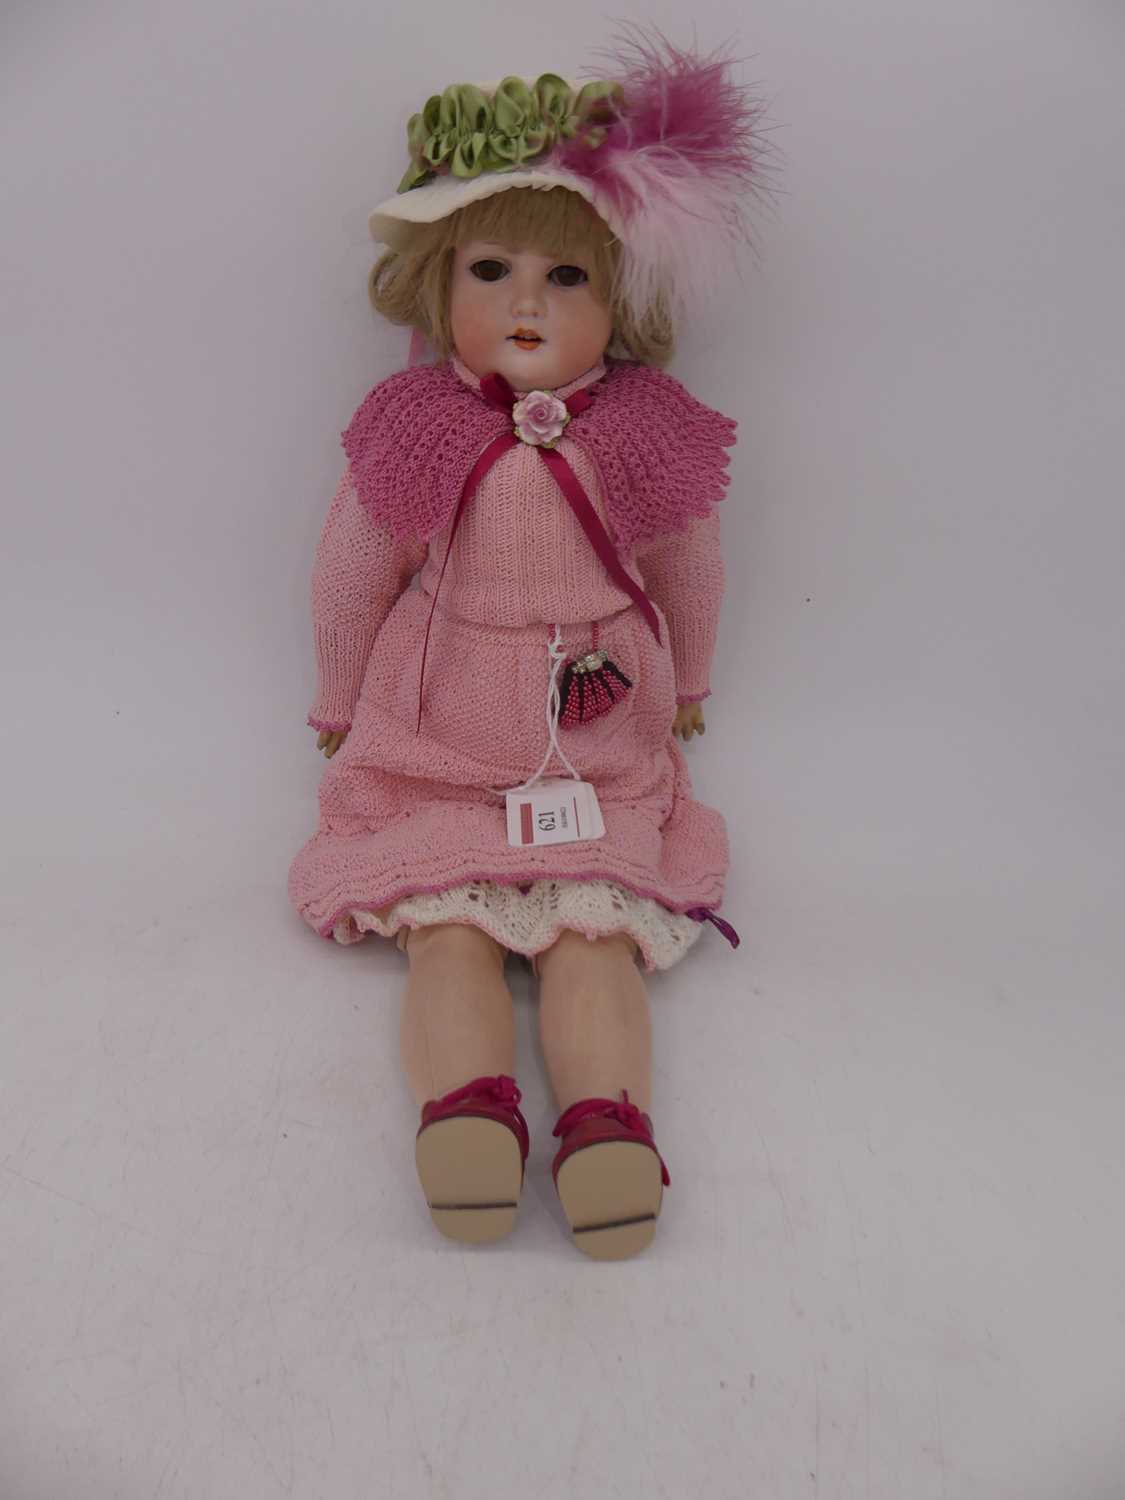 An early 20th century Armand Marseilles bisque head doll, having rolling brown eyes, open mouth with